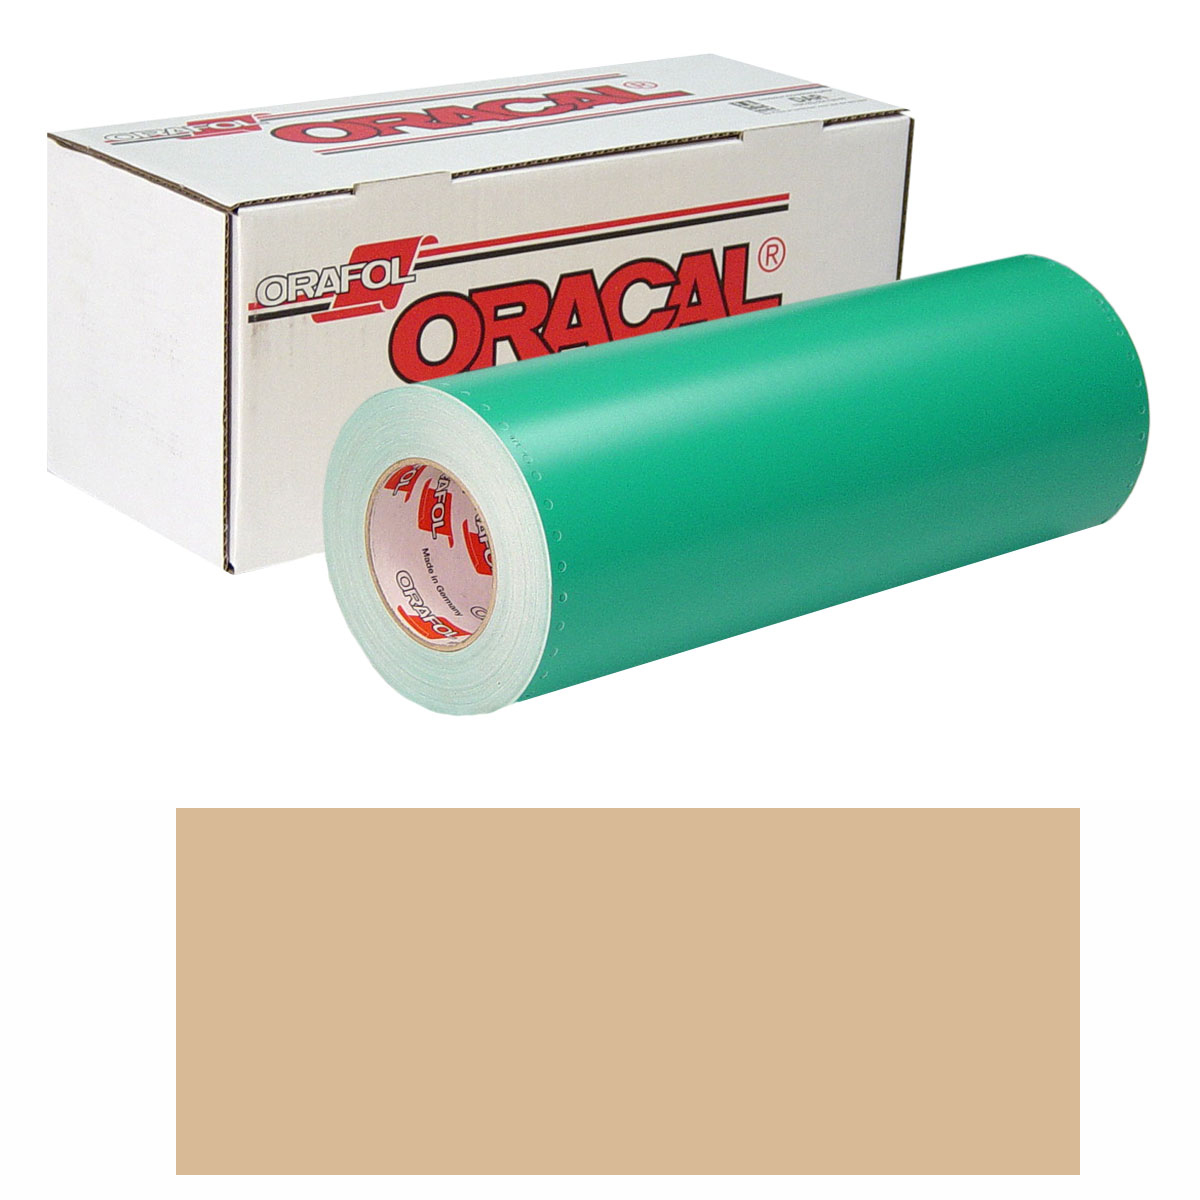 ORACAL 8500 15in X 10yd 081 Light Brown